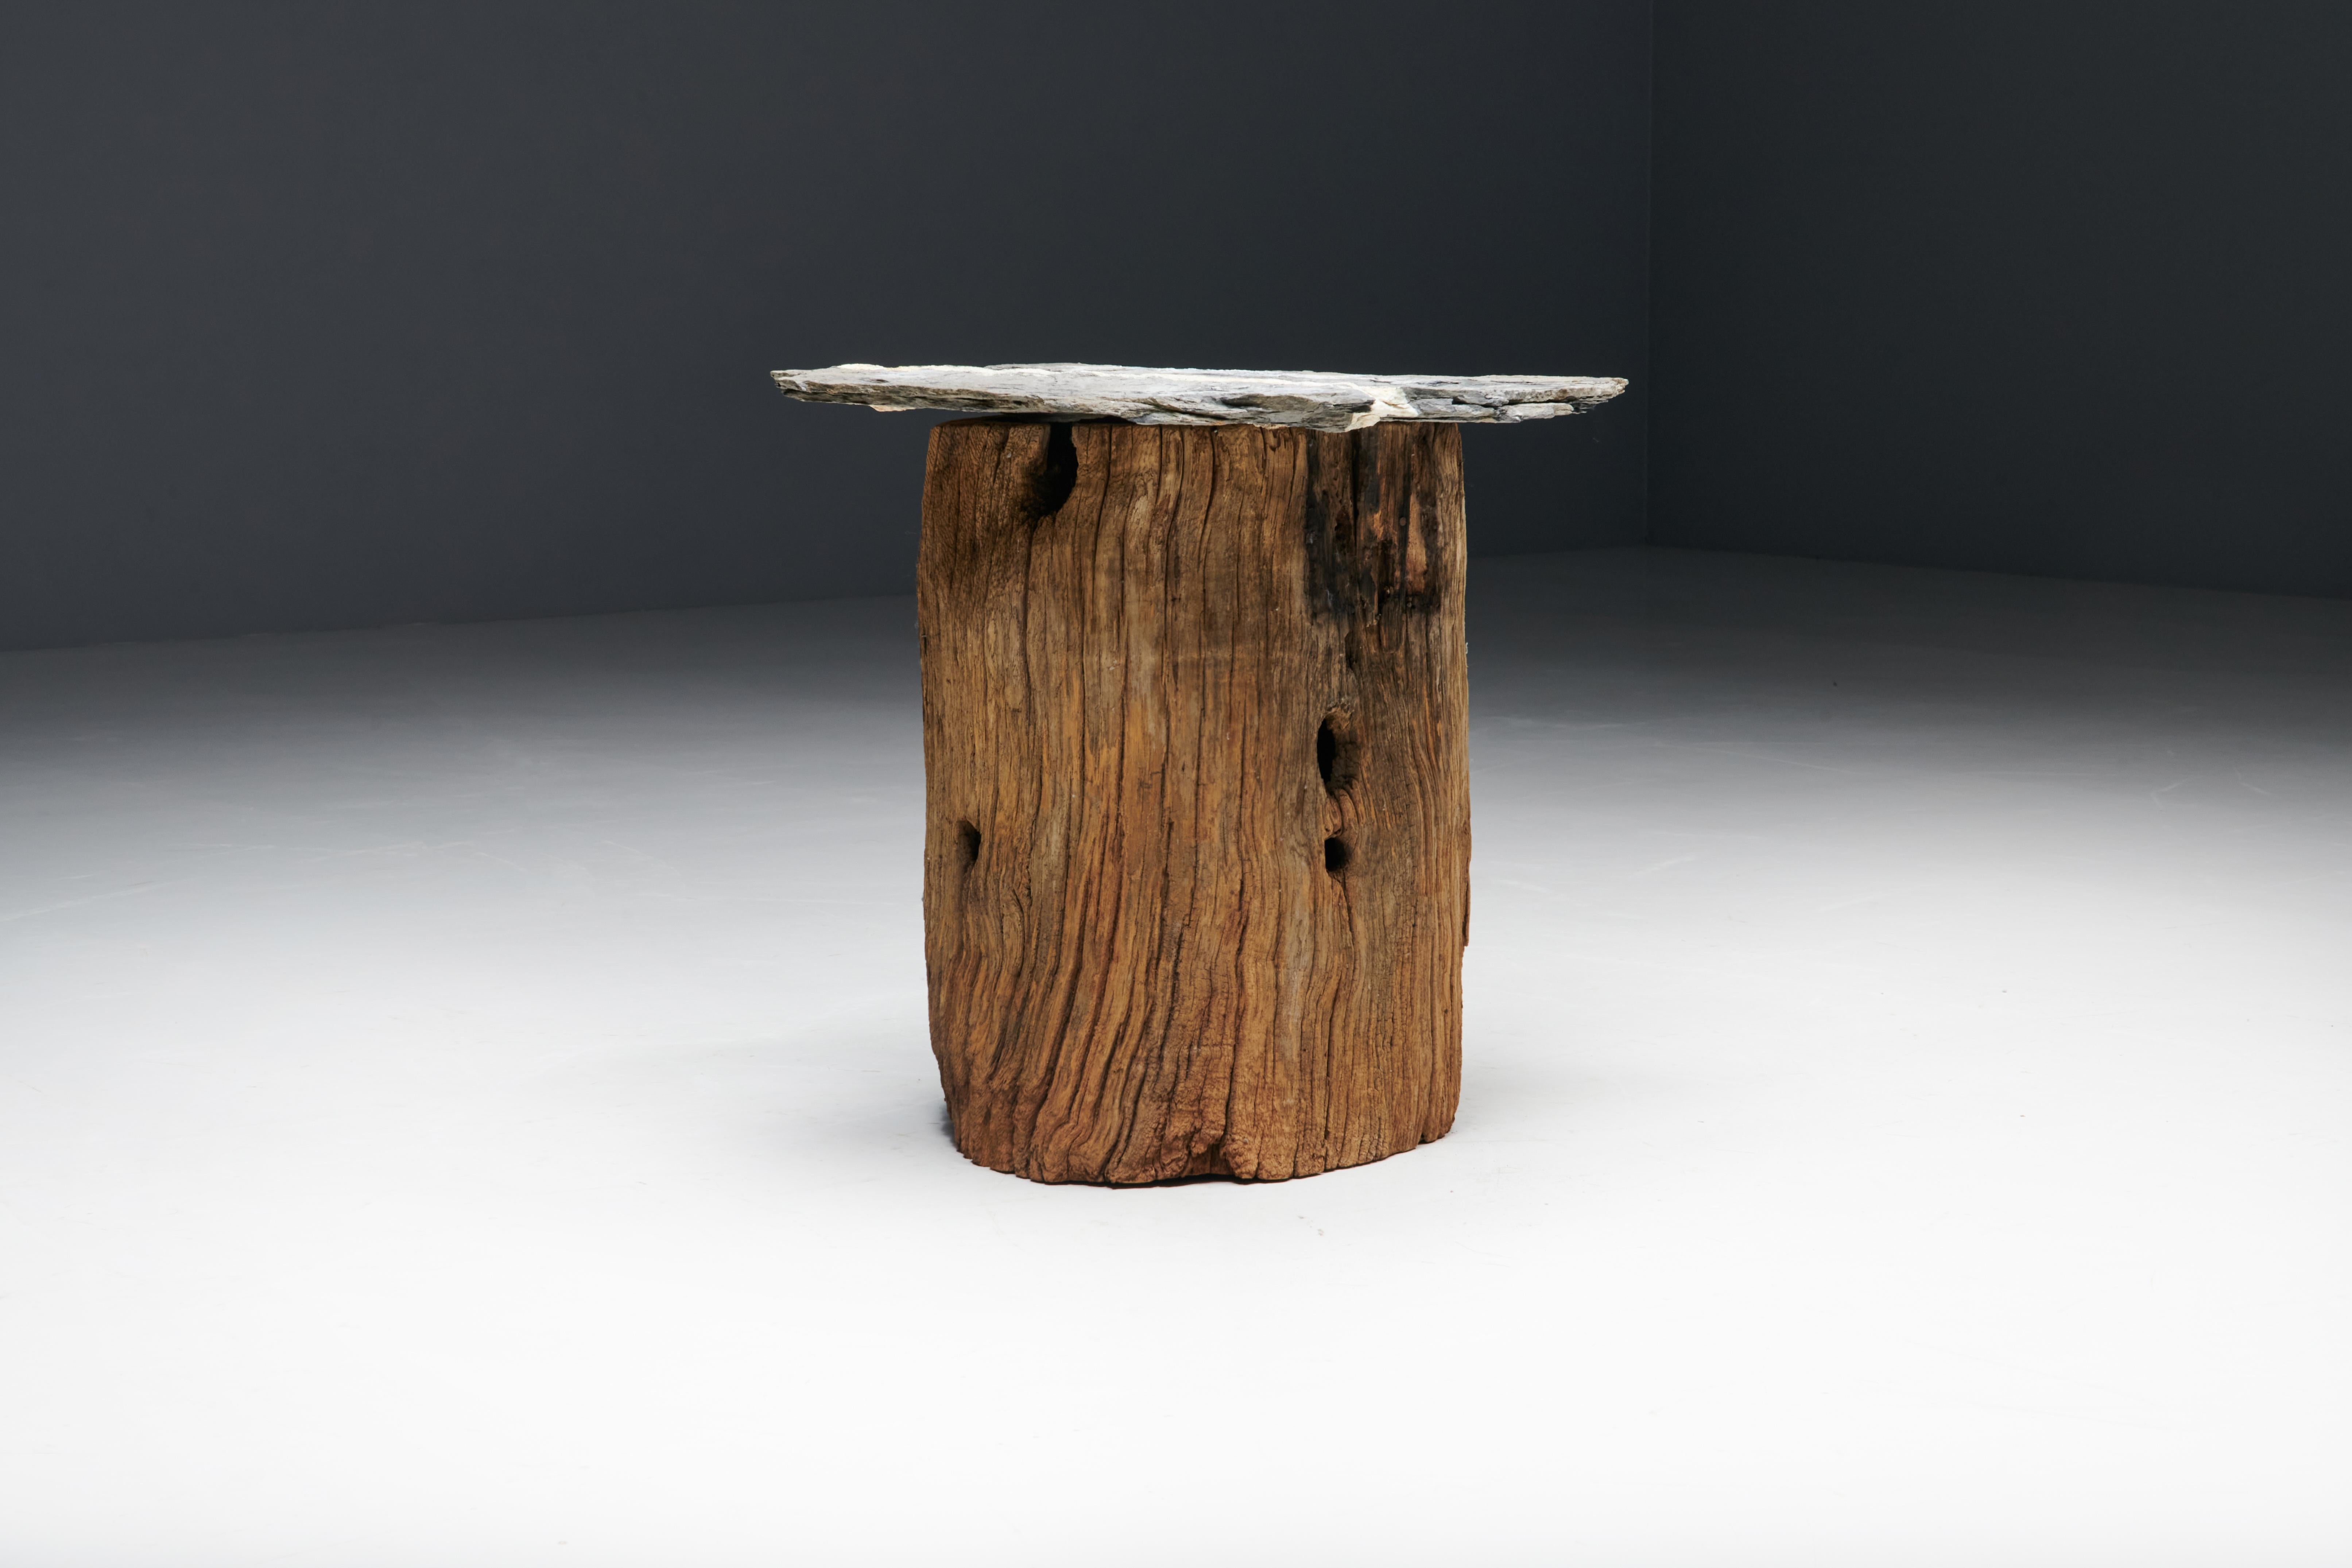 Rustic Brutalist Travail Populaire Side Table, France, Early 20th Century For Sale